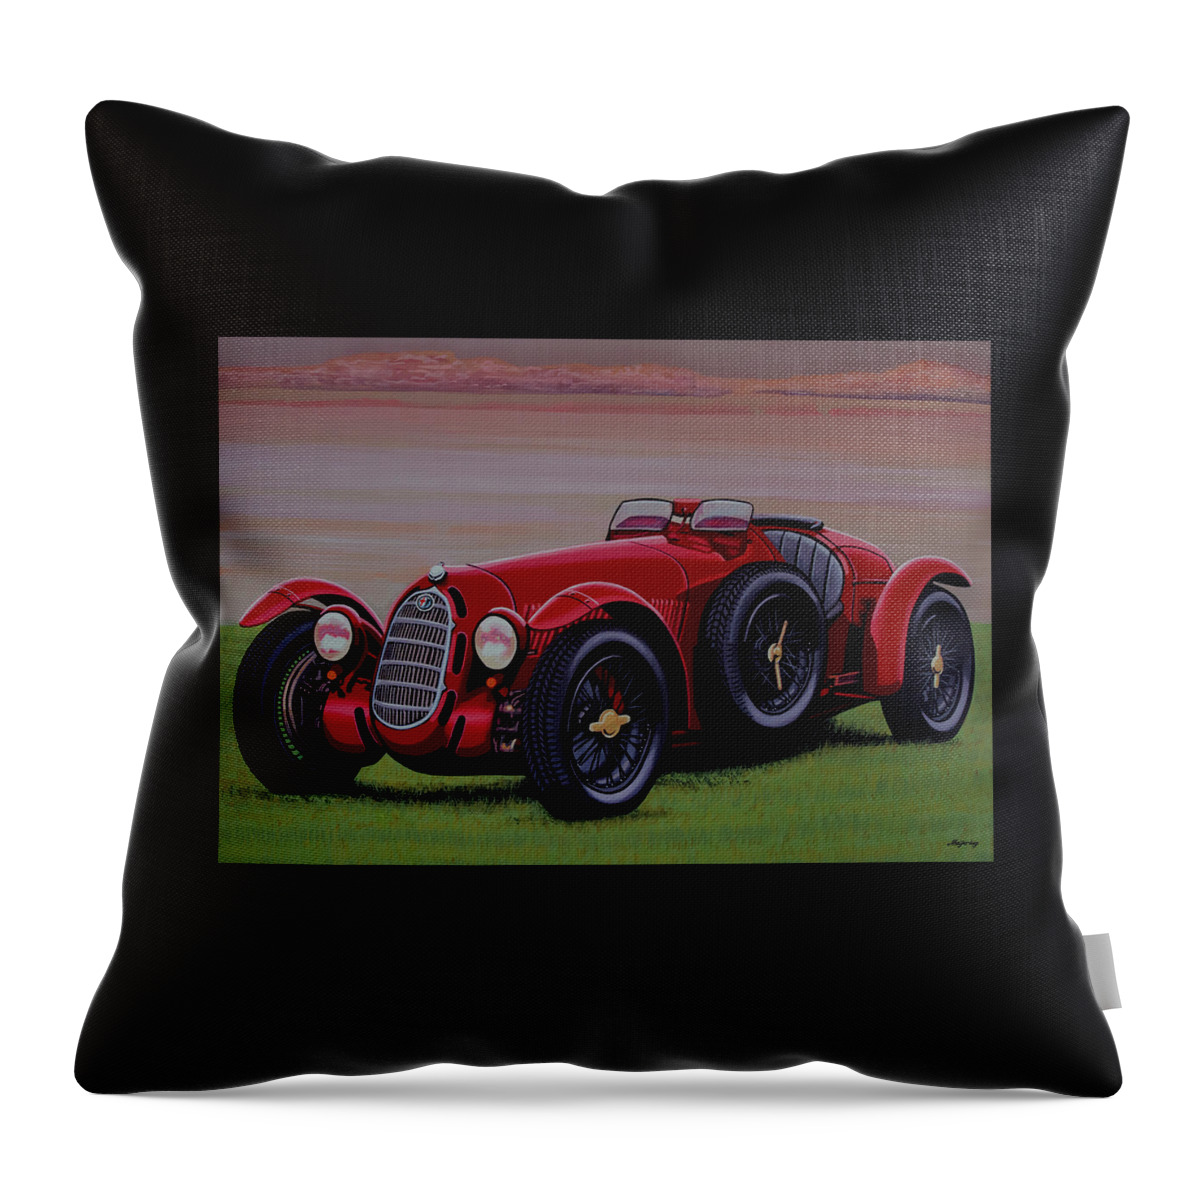 Alfa Romeo 8c 2900a Botticella Spider 1936 Throw Pillow featuring the painting Alfa Romeo 8C 2900A Botticella Spider 1936 Painting by Paul Meijering